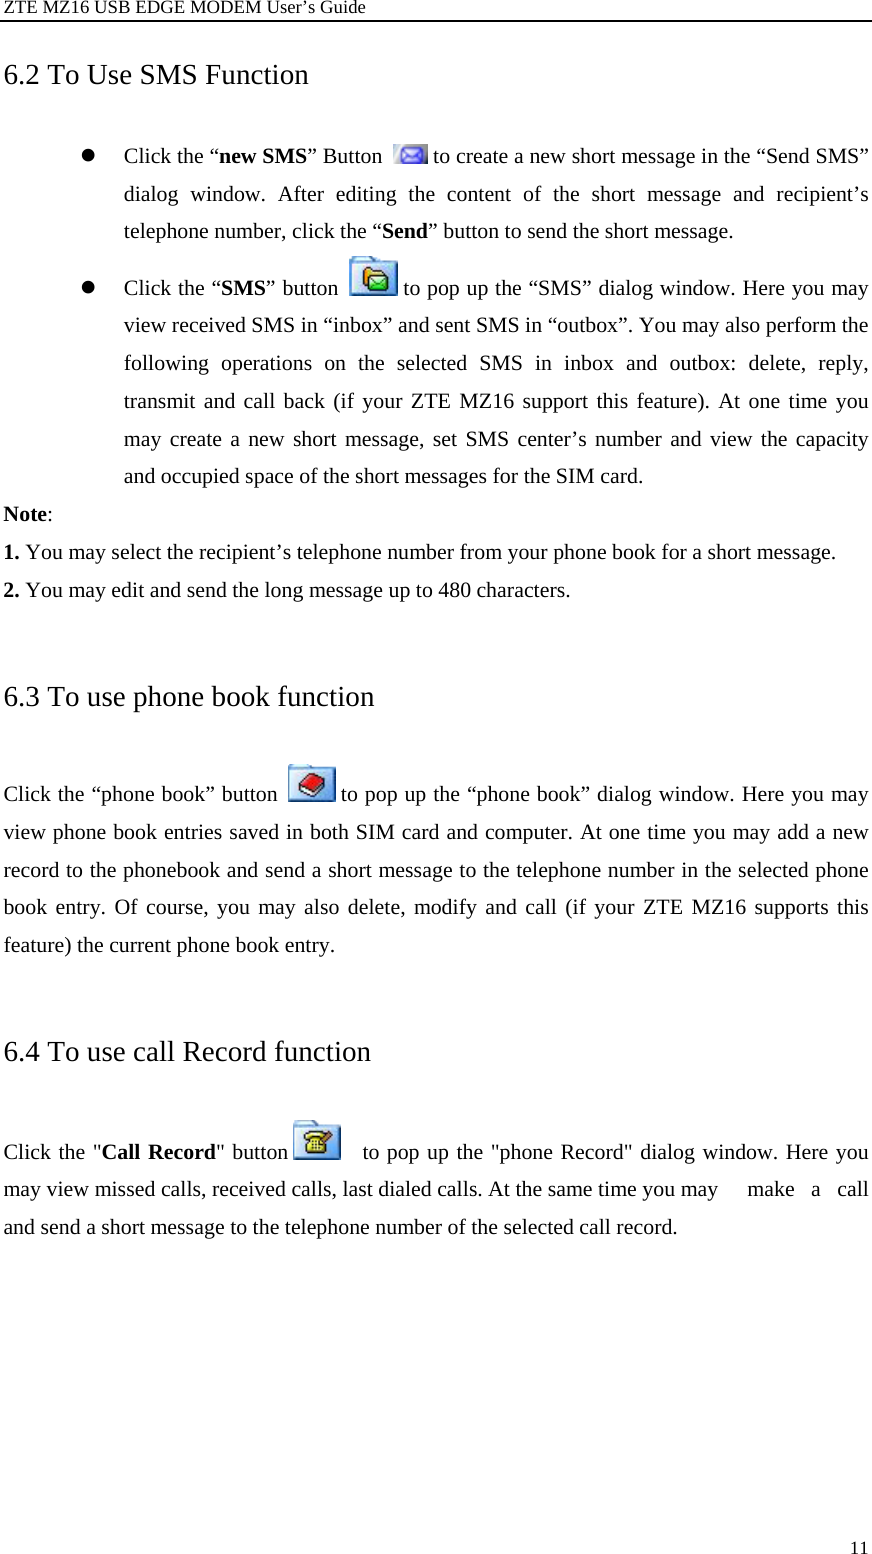 ZTE MZ16 USB EDGE MODEM User’s Guide 11 6.2 To Use SMS Function z Click the “new SMS” Button   to create a new short message in the “Send SMS” dialog window. After editing the content of the short message and recipient’s telephone number, click the “Send” button to send the short message.   z Click the “SMS” button   to pop up the “SMS” dialog window. Here you may view received SMS in “inbox” and sent SMS in “outbox”. You may also perform the following operations on the selected SMS in inbox and outbox: delete, reply, transmit and call back (if your ZTE MZ16 support this feature). At one time you may create a new short message, set SMS center’s number and view the capacity and occupied space of the short messages for the SIM card. Note: 1. You may select the recipient’s telephone number from your phone book for a short message. 2. You may edit and send the long message up to 480 characters.  6.3 To use phone book function Click the “phone book” button   to pop up the “phone book” dialog window. Here you may view phone book entries saved in both SIM card and computer. At one time you may add a new record to the phonebook and send a short message to the telephone number in the selected phone book entry. Of course, you may also delete, modify and call (if your ZTE MZ16 supports this feature) the current phone book entry.  6.4 To use call Record function Click the &quot;Call Record&quot; button      to pop up the &quot;phone Record&quot; dialog window. Here you may view missed calls, received calls, last dialed calls. At the same time you may    make  a  call and send a short message to the telephone number of the selected call record.  